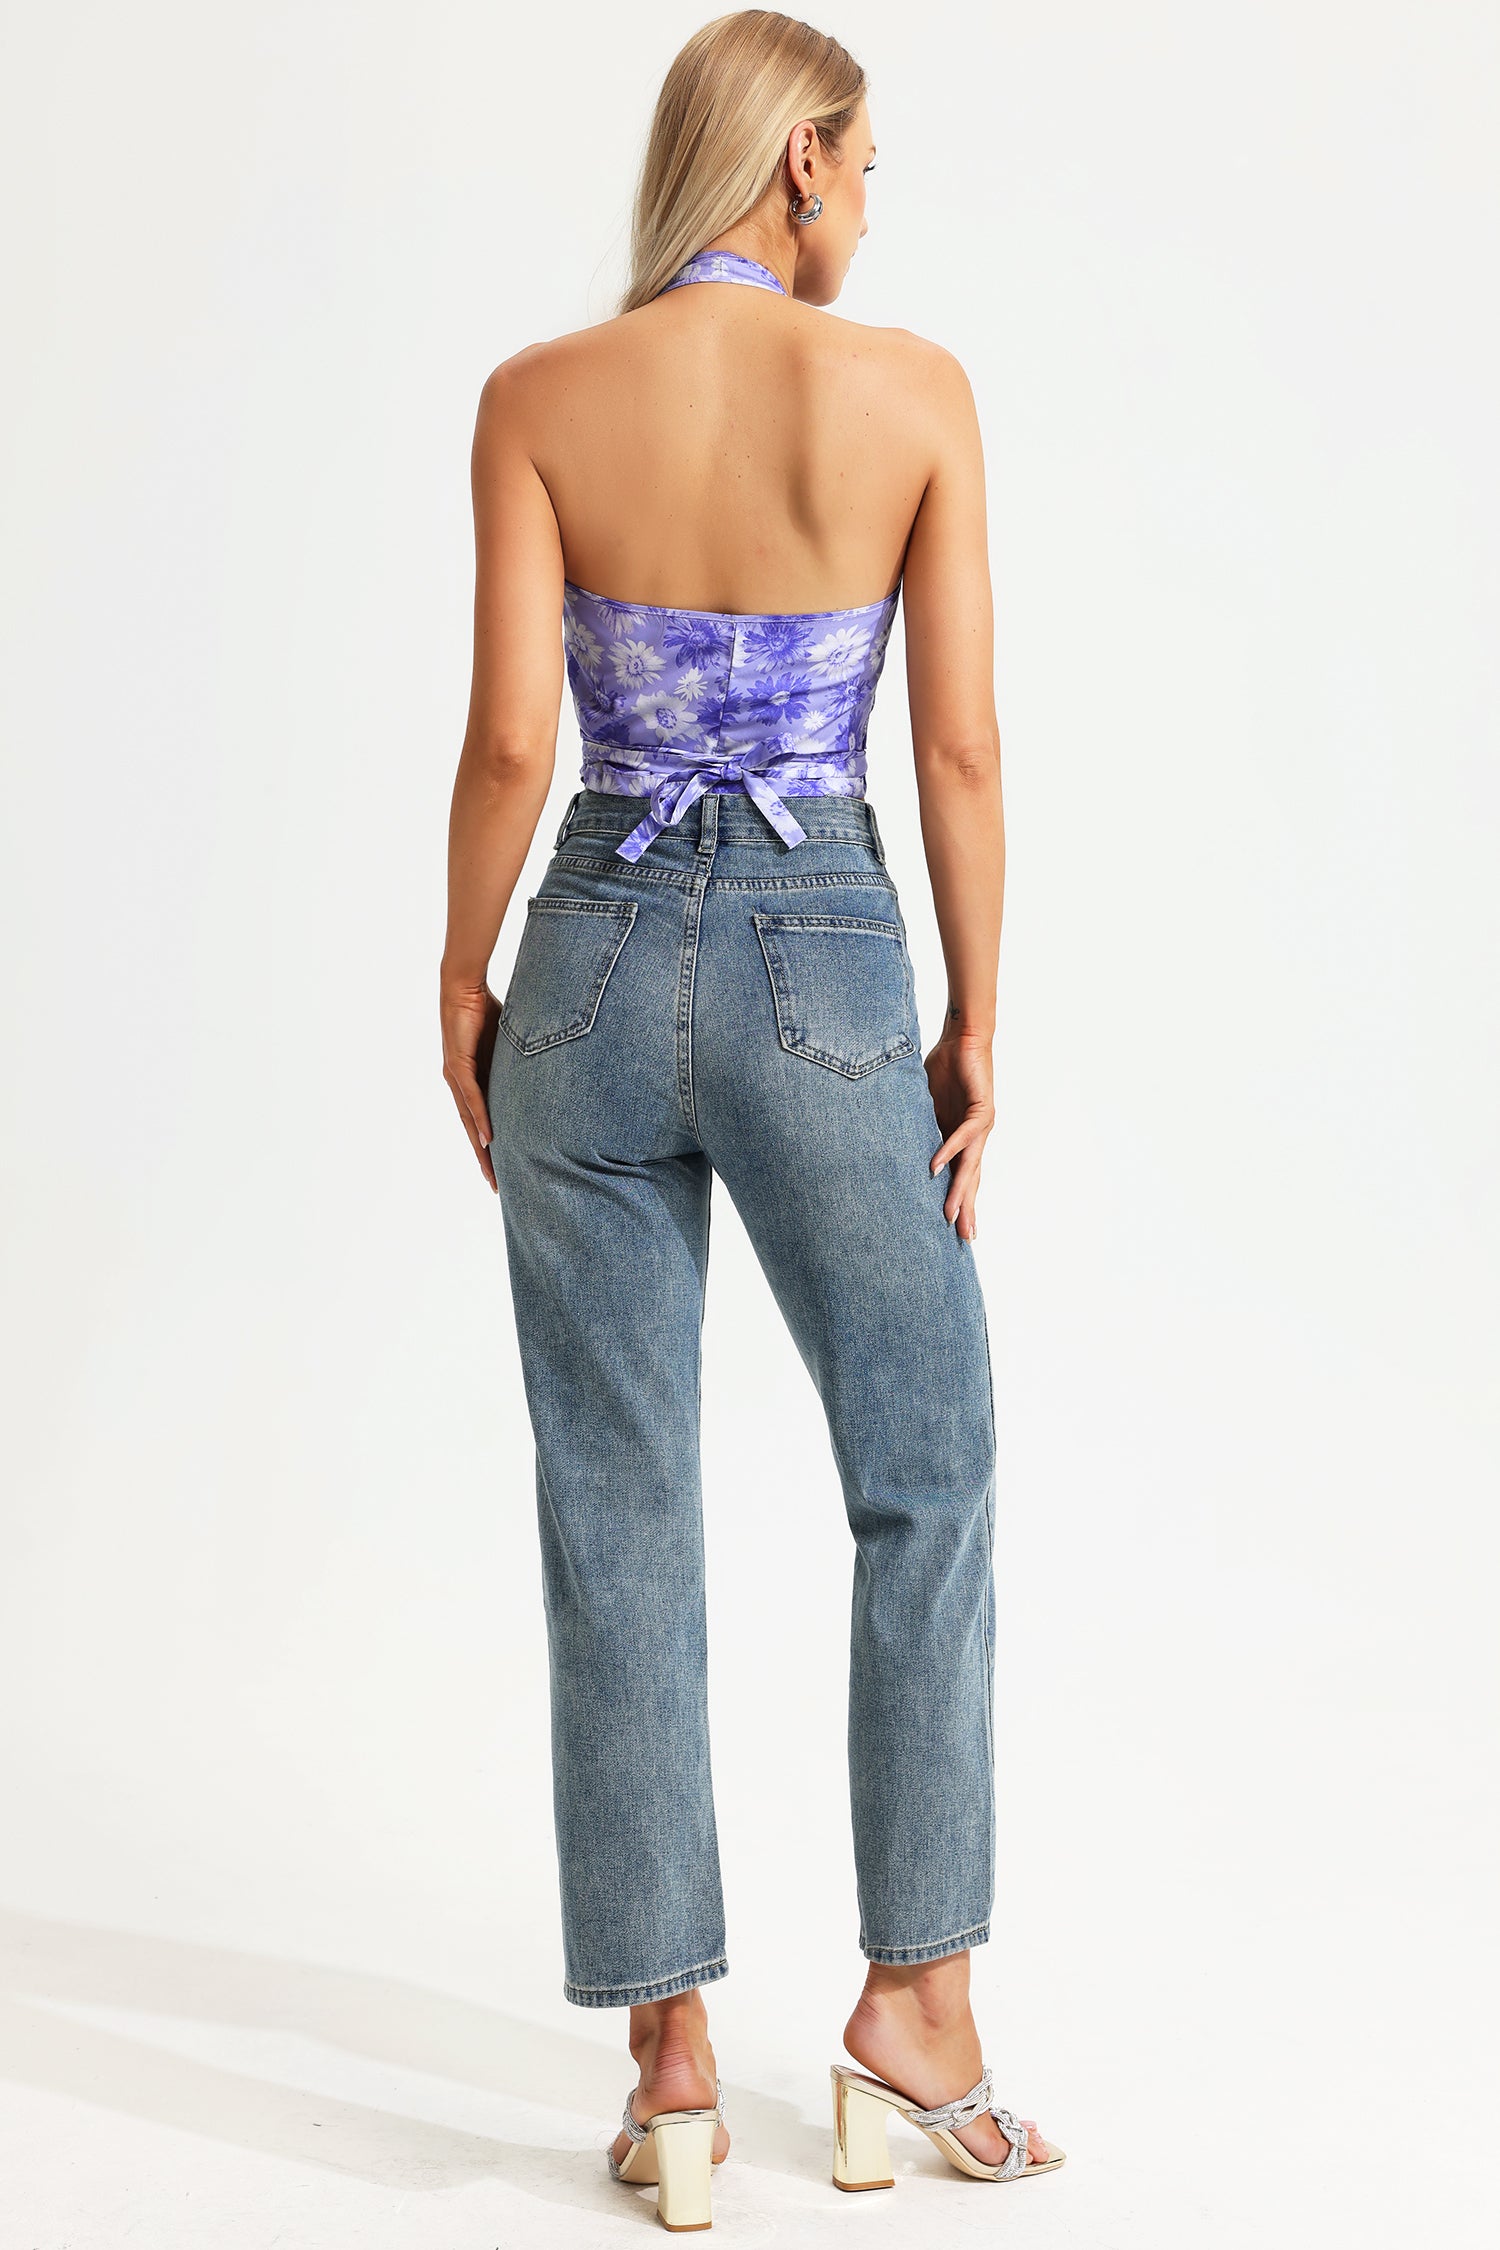 Wrapover Lace Up Backless Print Camis